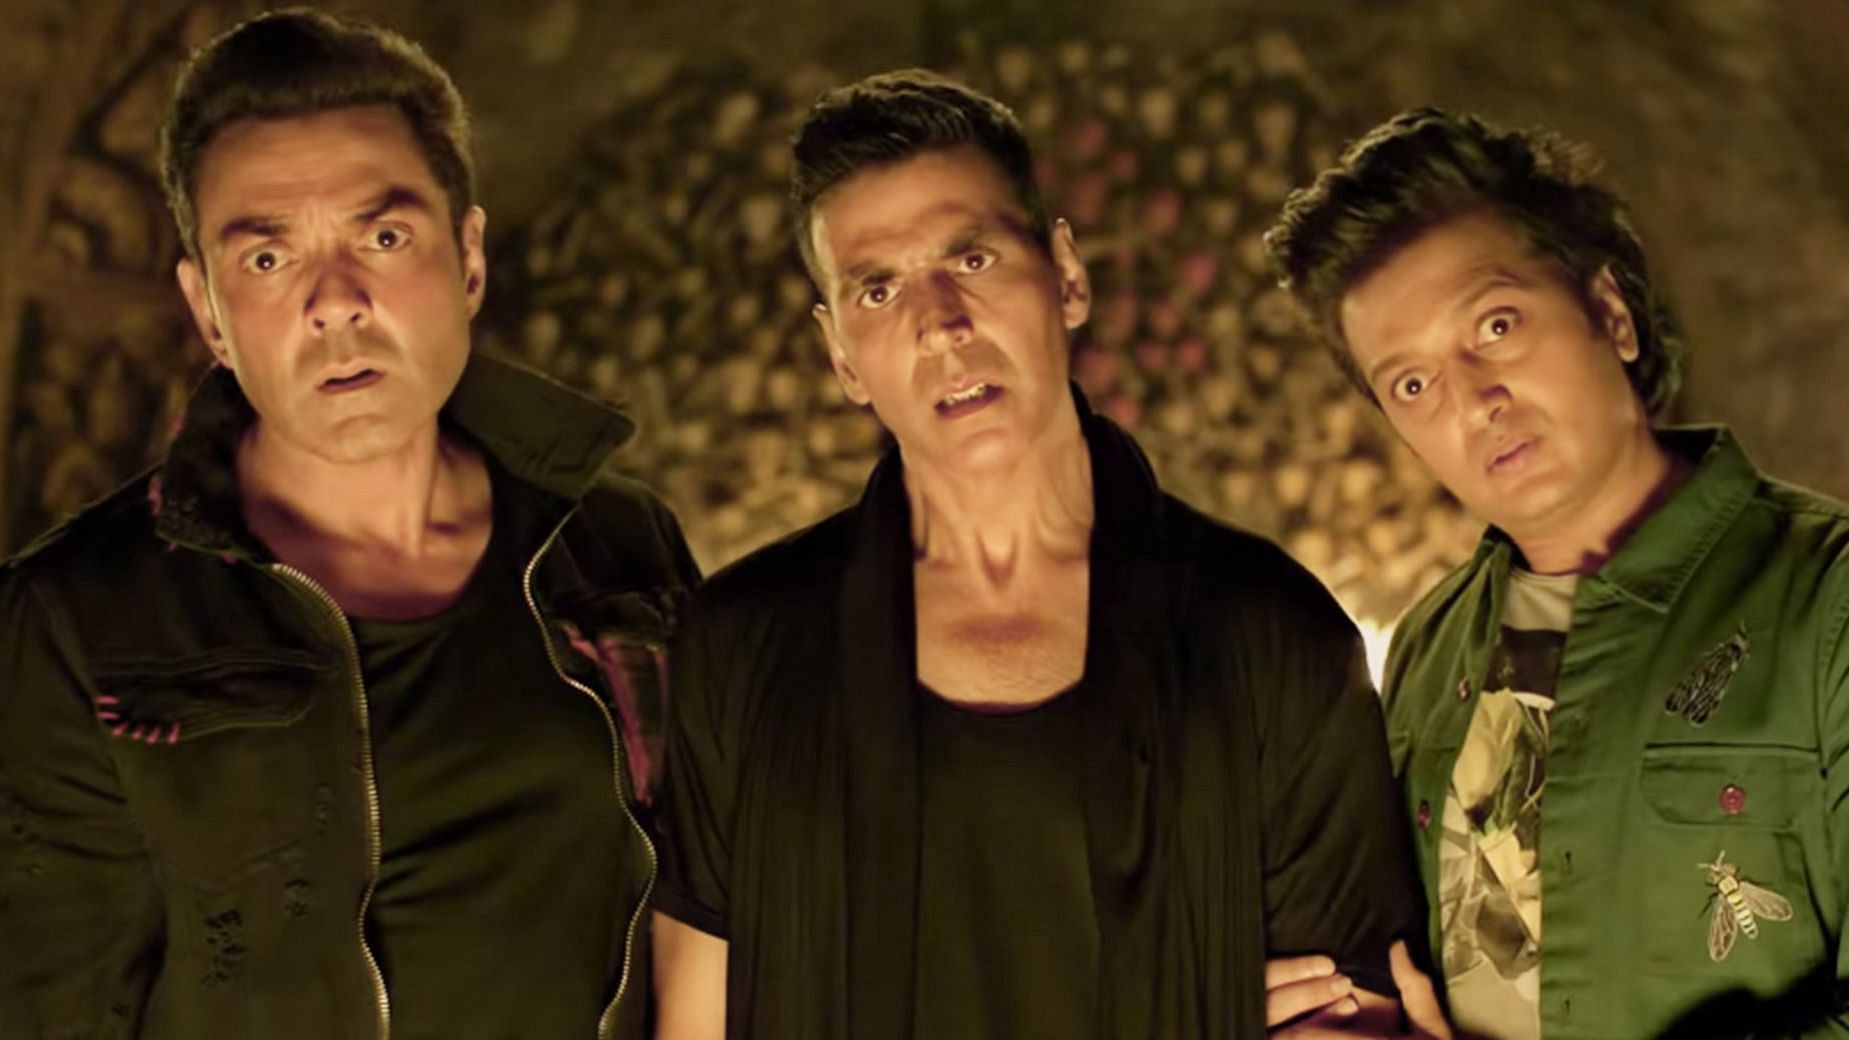 Stay at home with family this Diwali than heading to the theatres to watch <i>Housefull 4</i>.&nbsp;